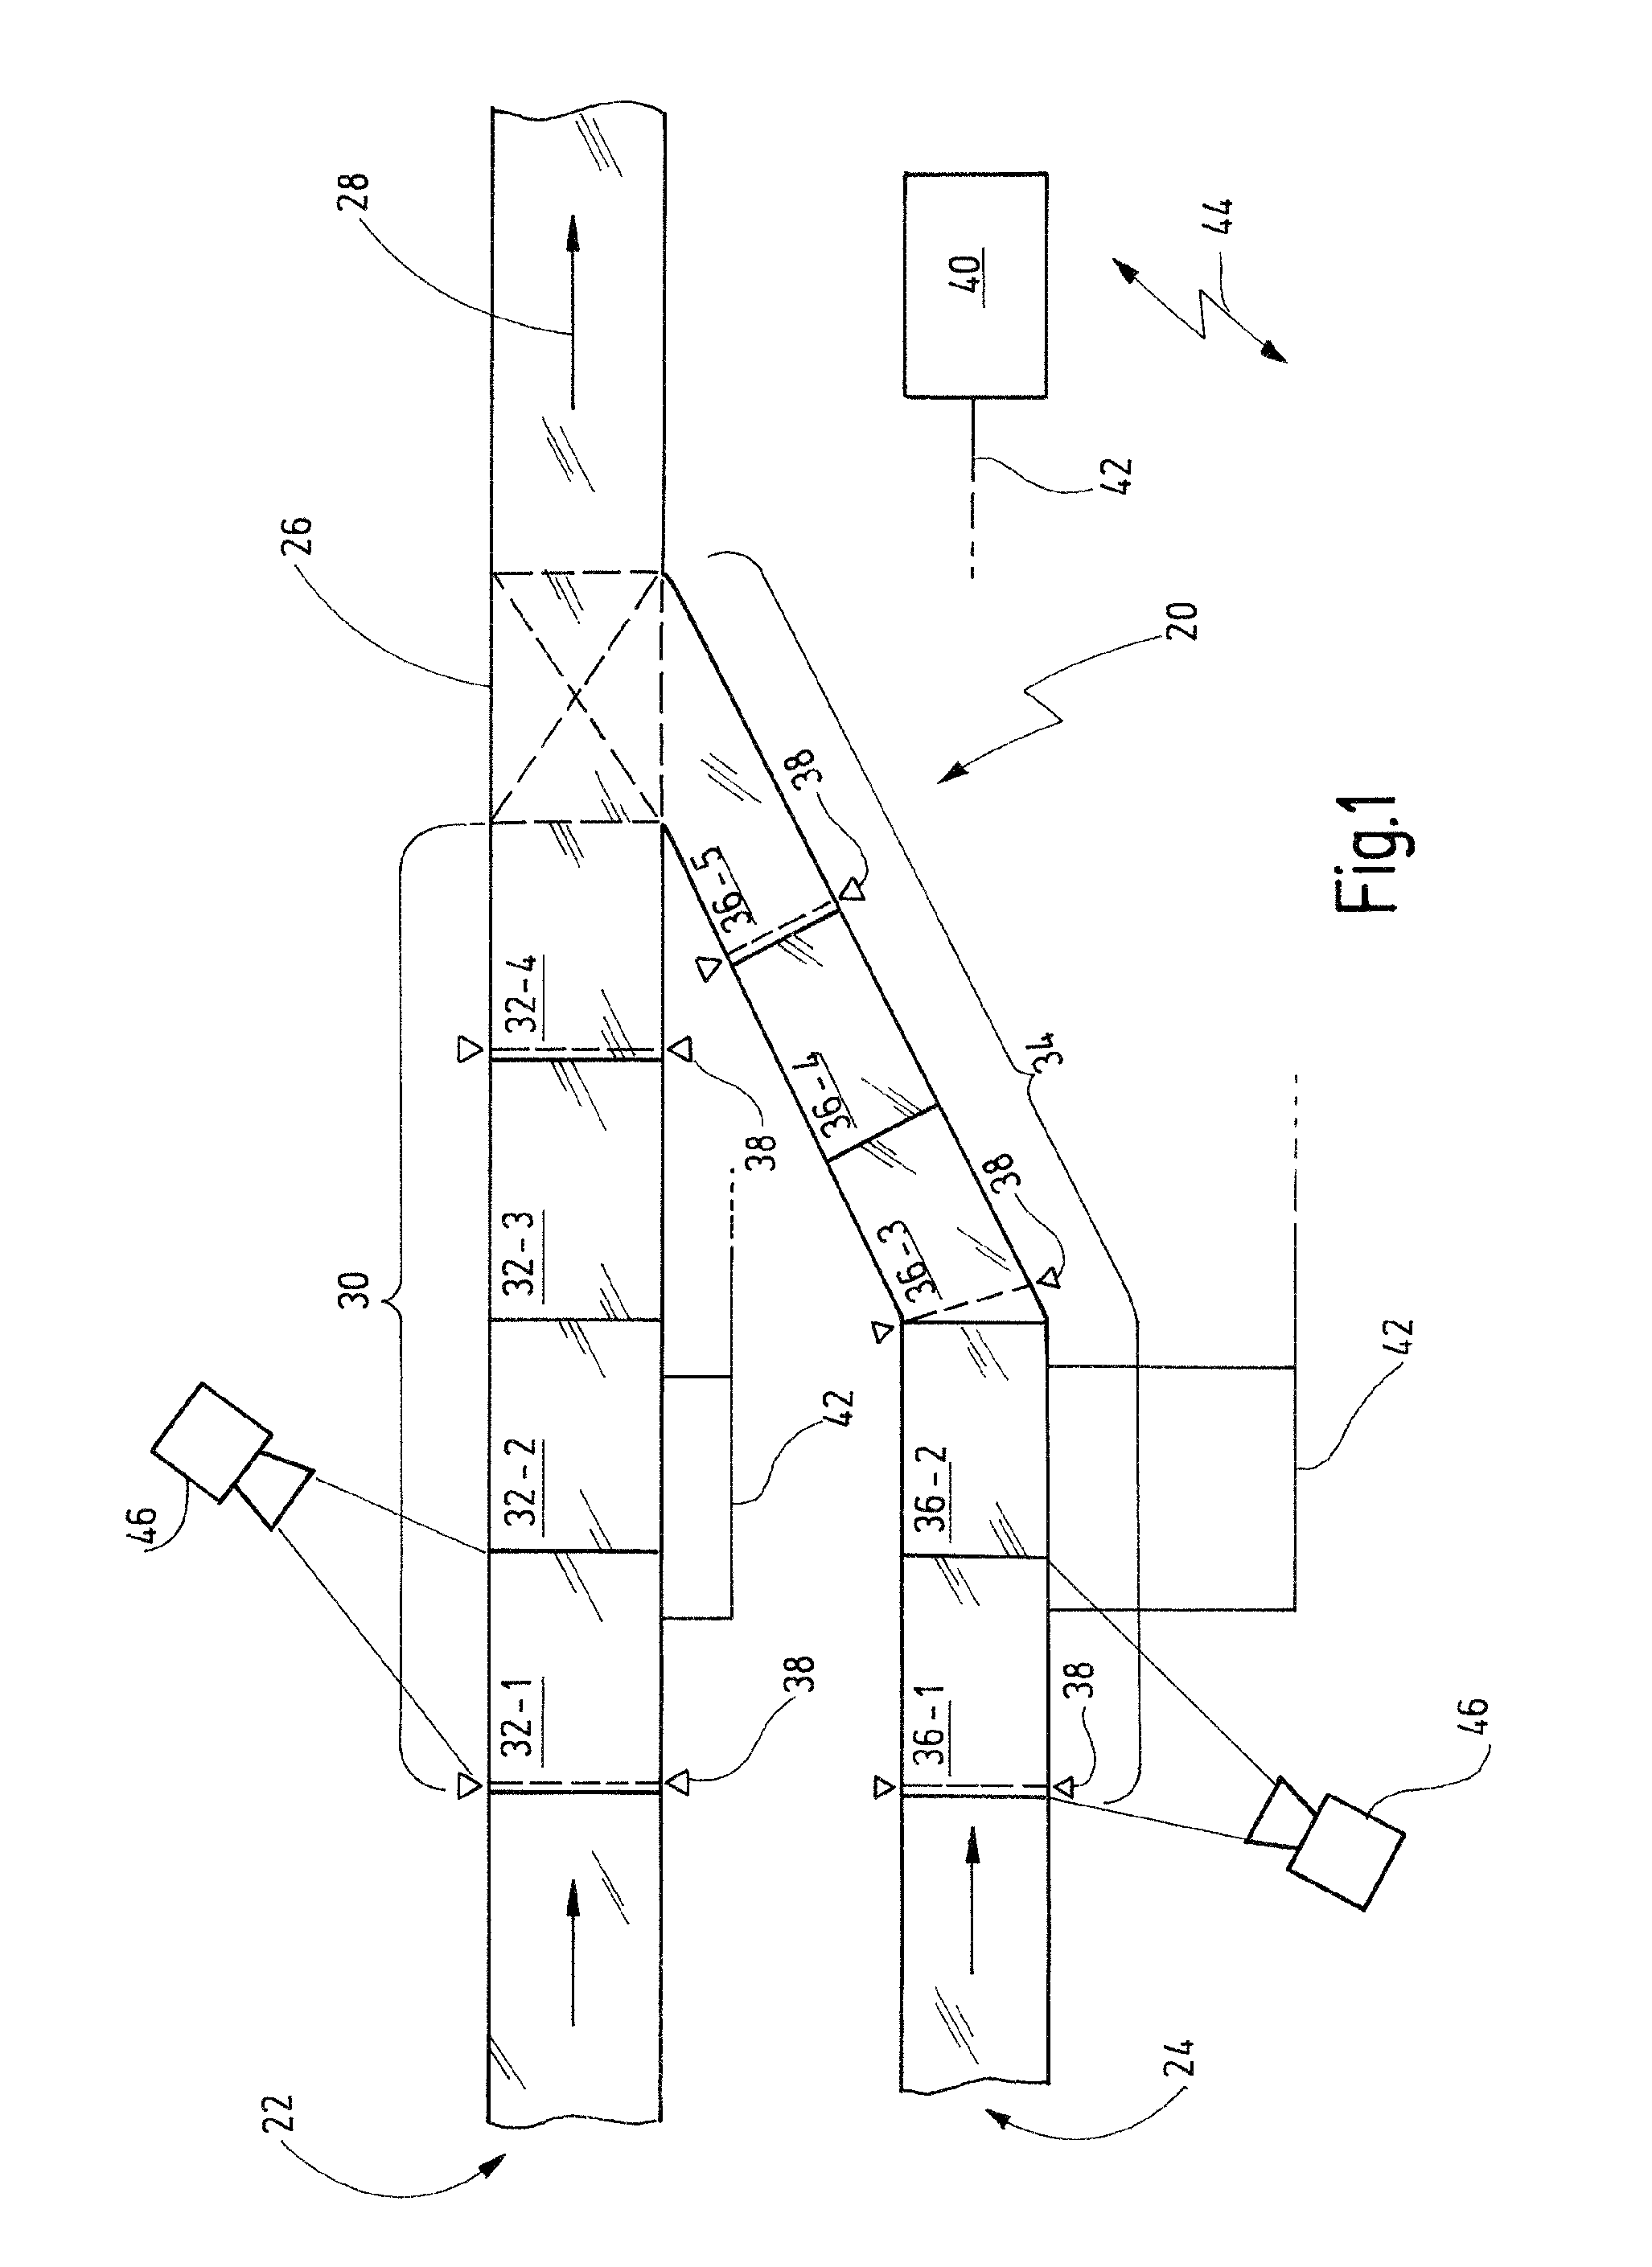 Material-flow control for collision avoidance in a conveyor system